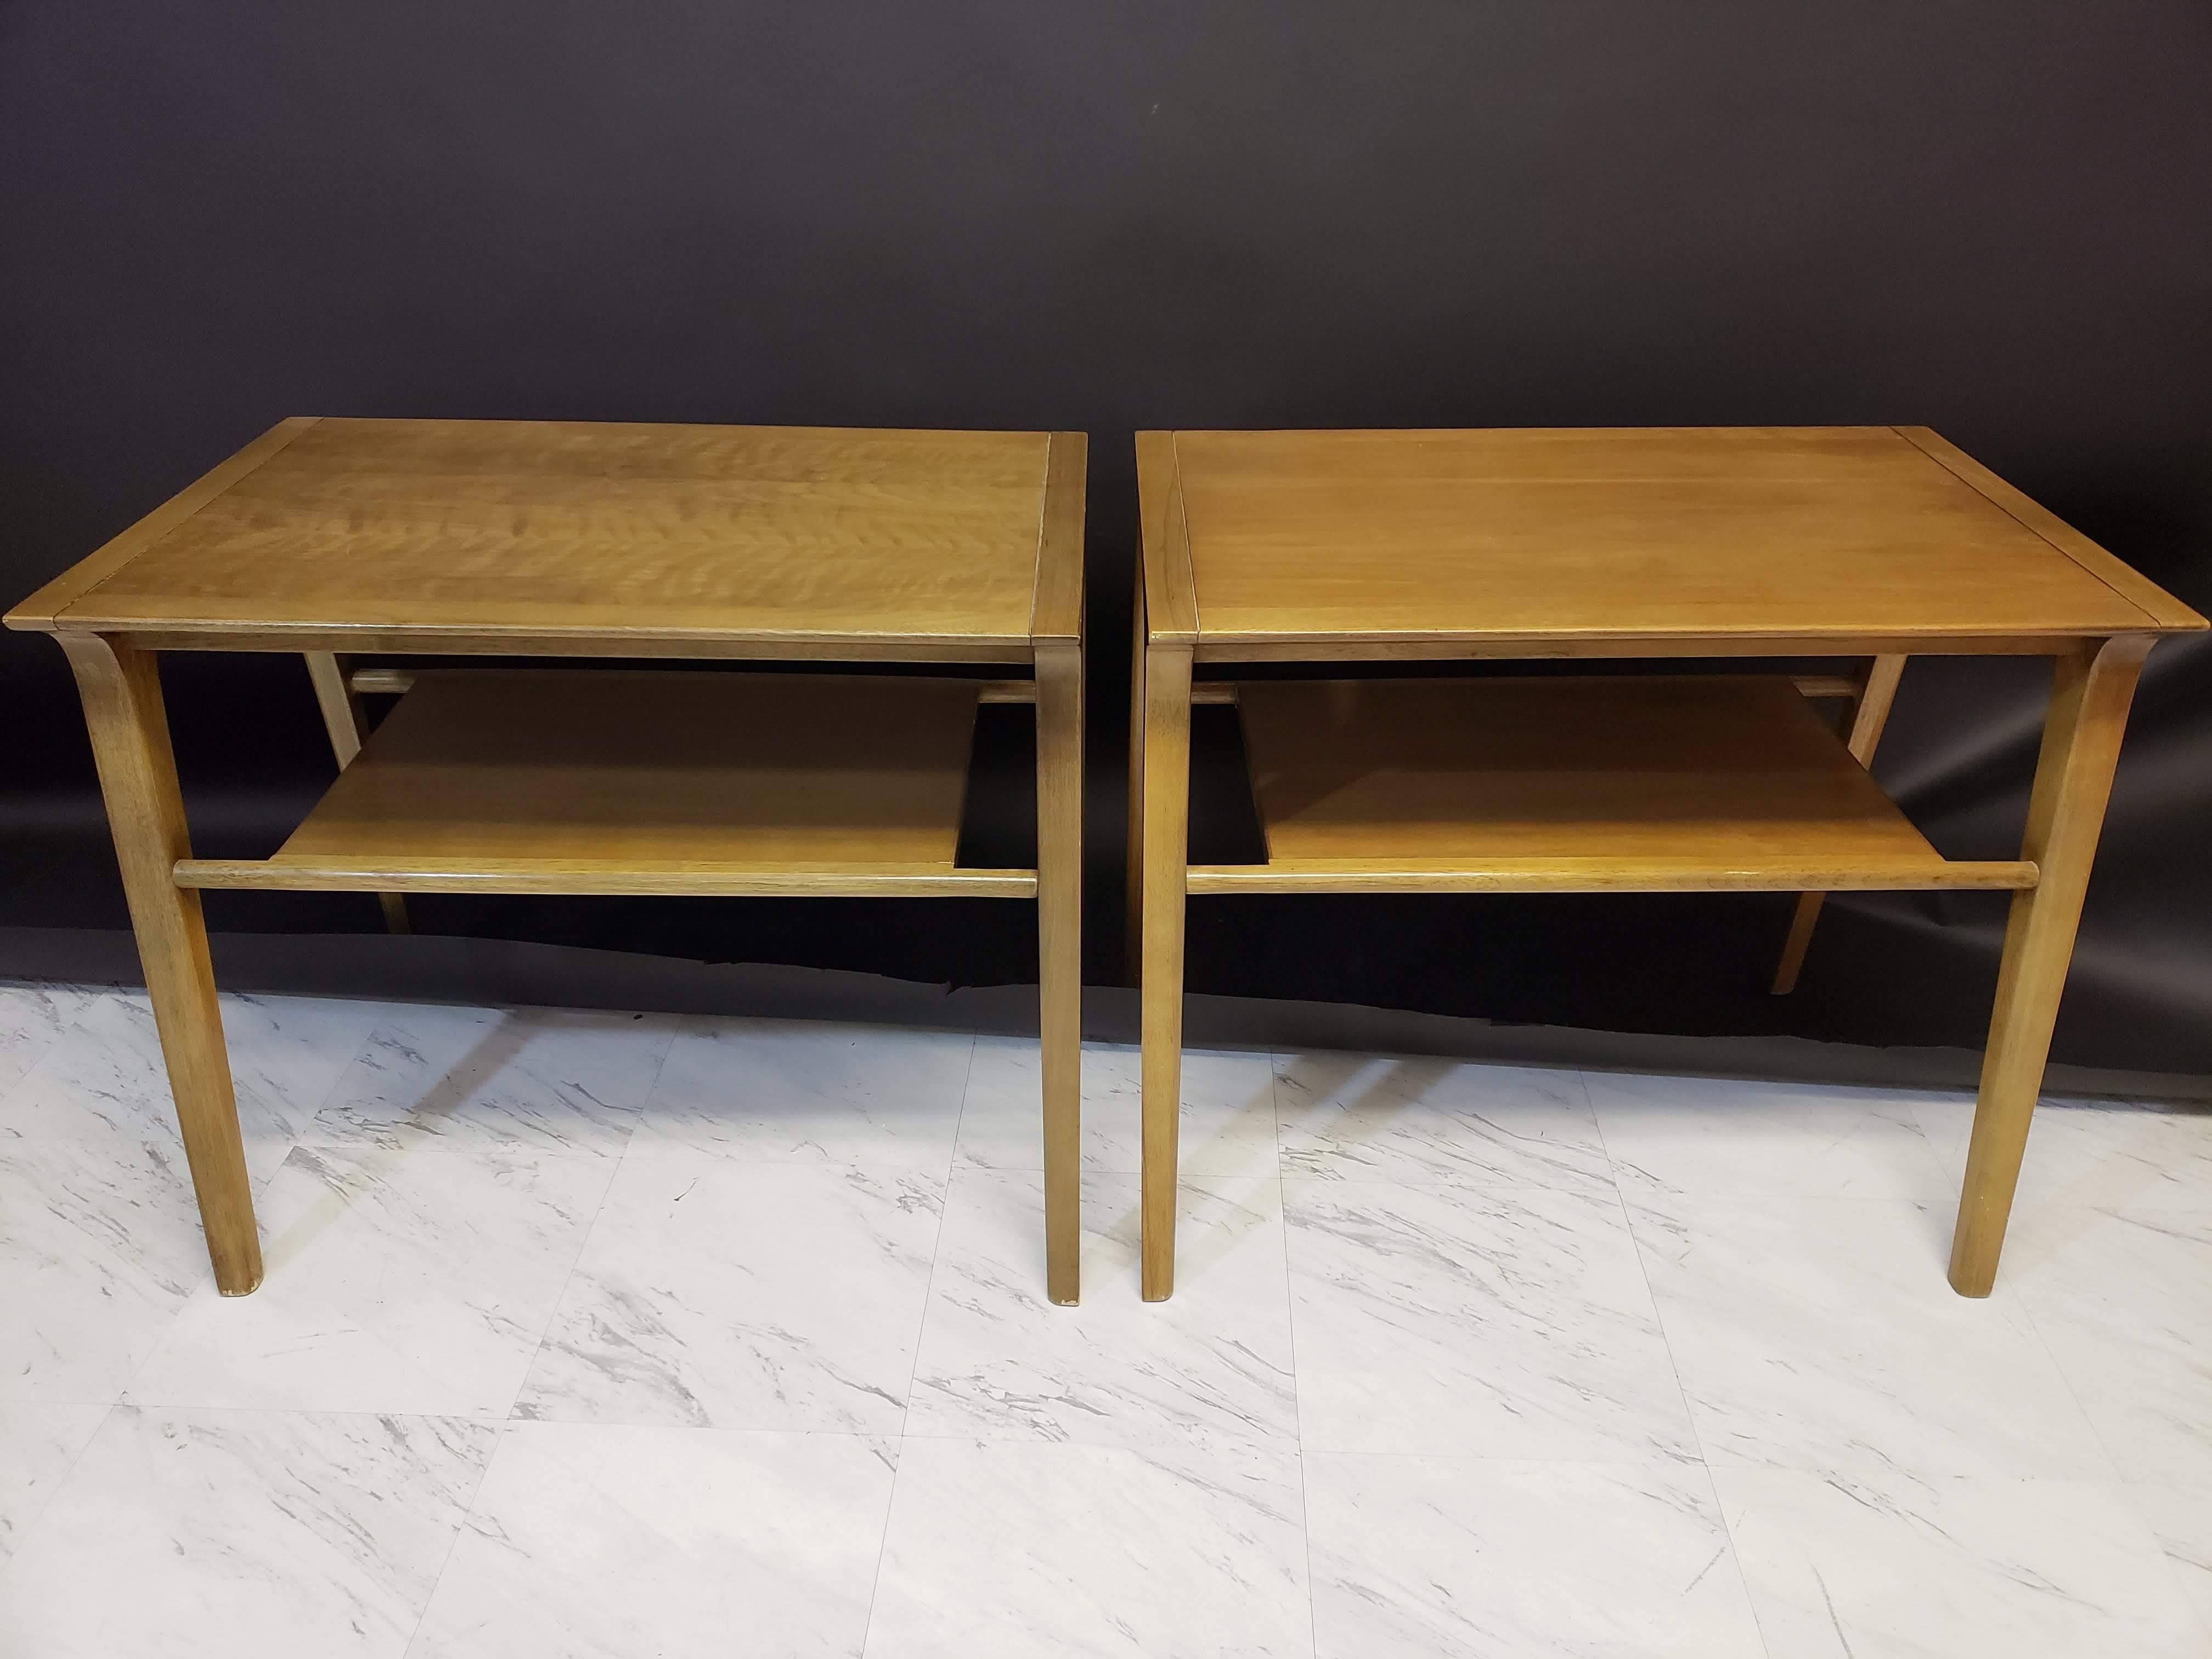 For your consideration is a stunning pair of John Van Koert end side tables. These tables are made of walnut and are very sturdy and in an excellent condition. Dimensions are: 28